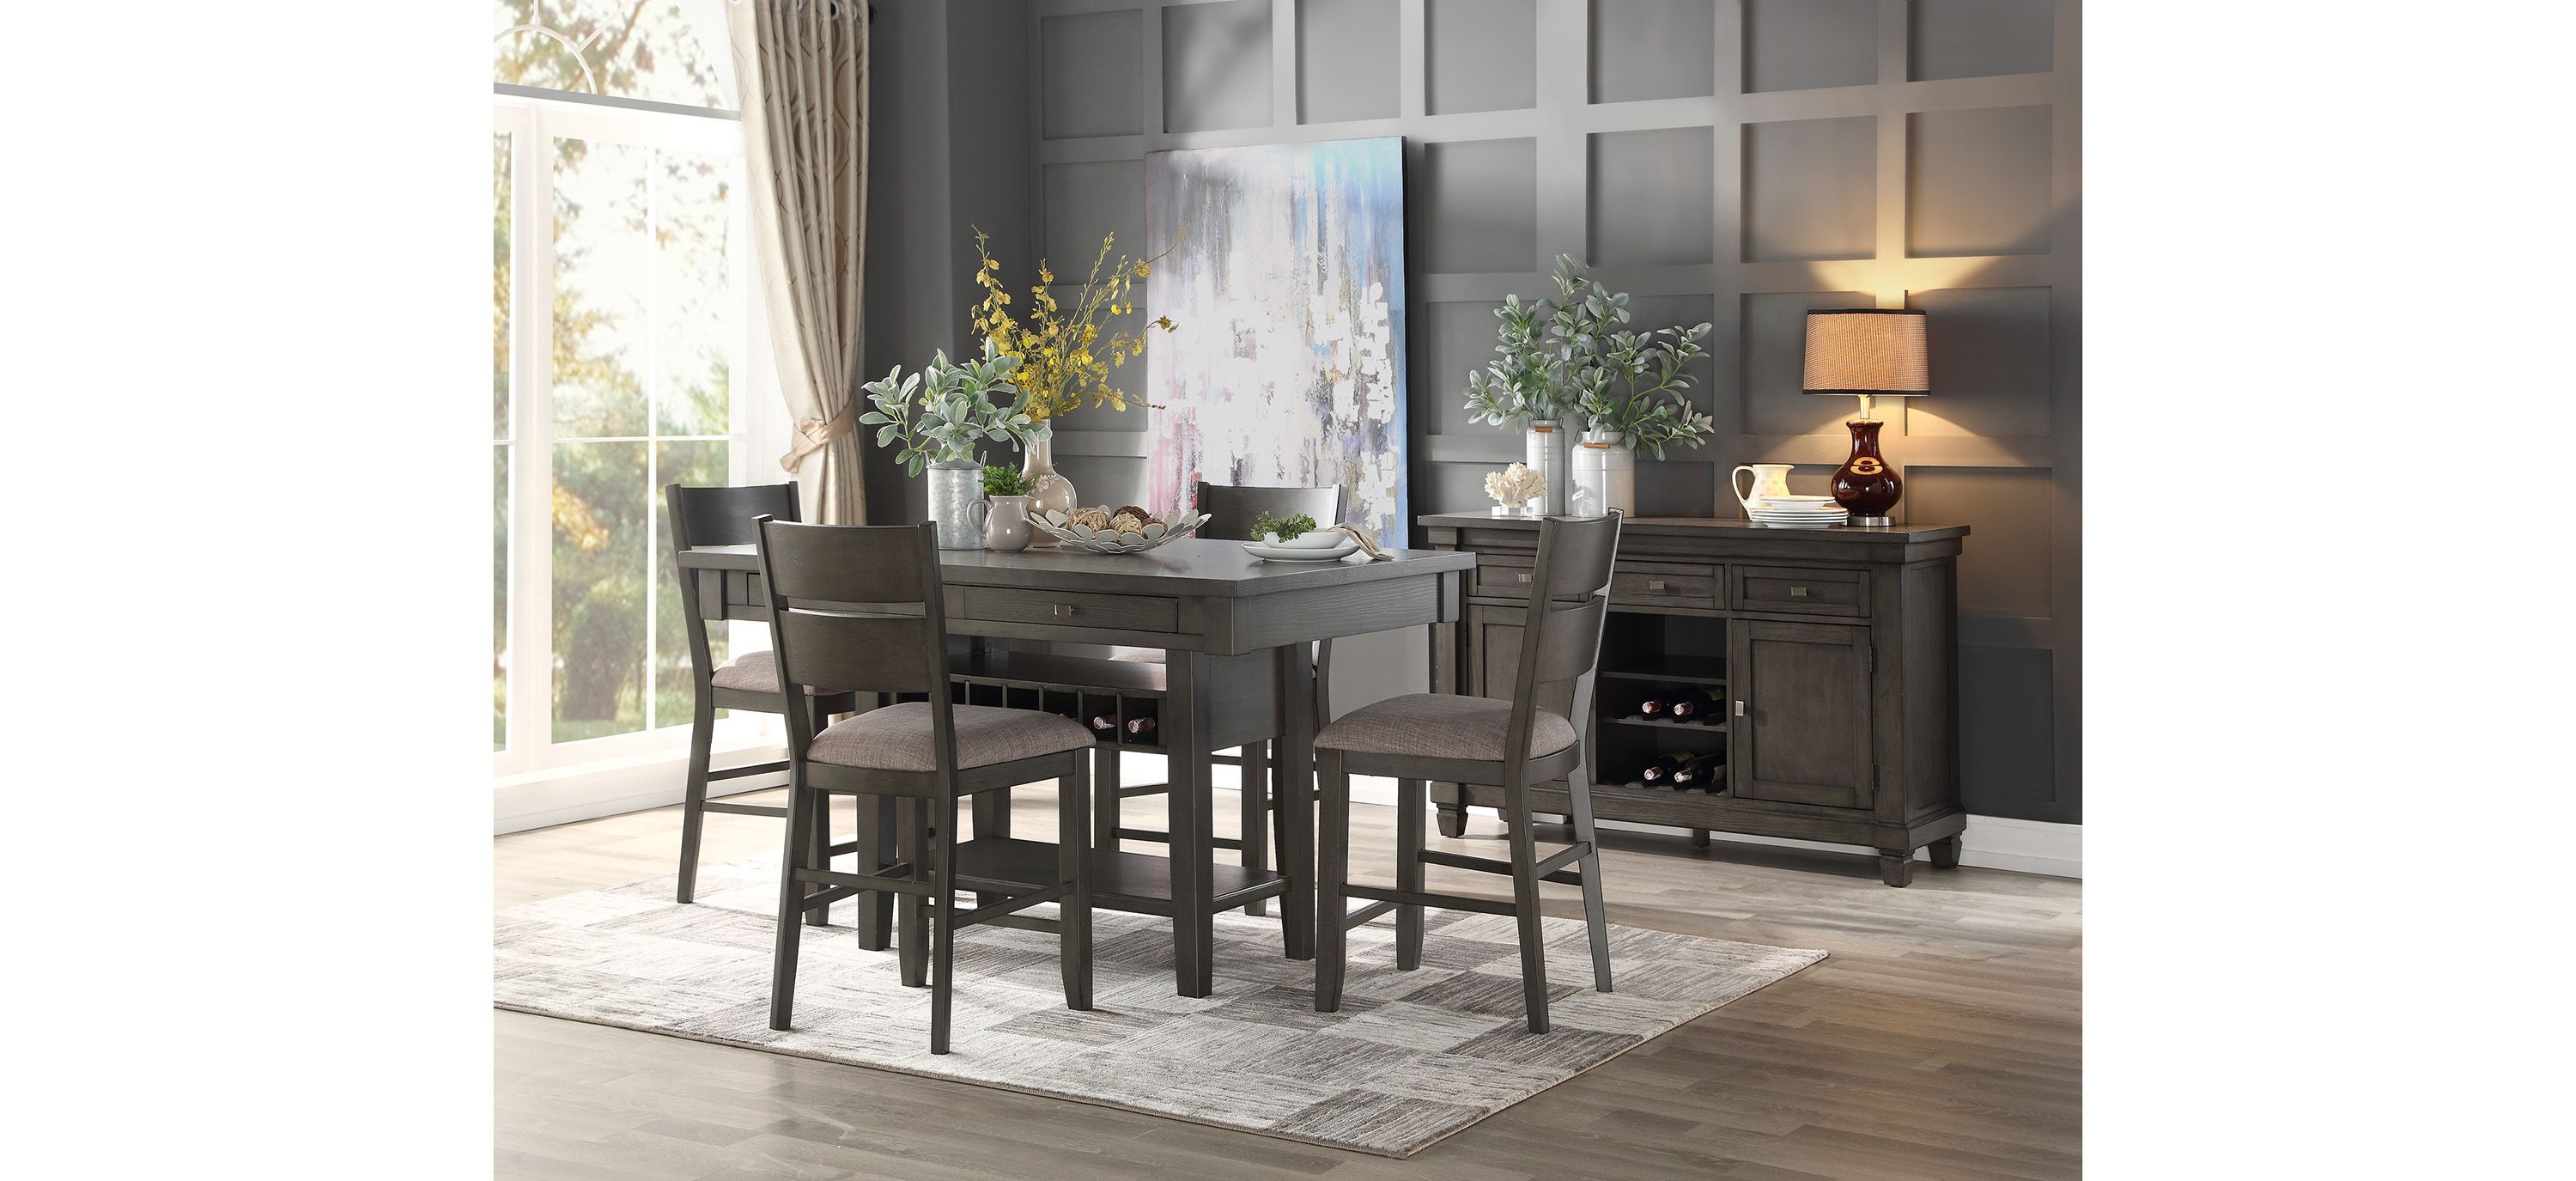 Brindle 5-pc. Counter Height Dining Room Set